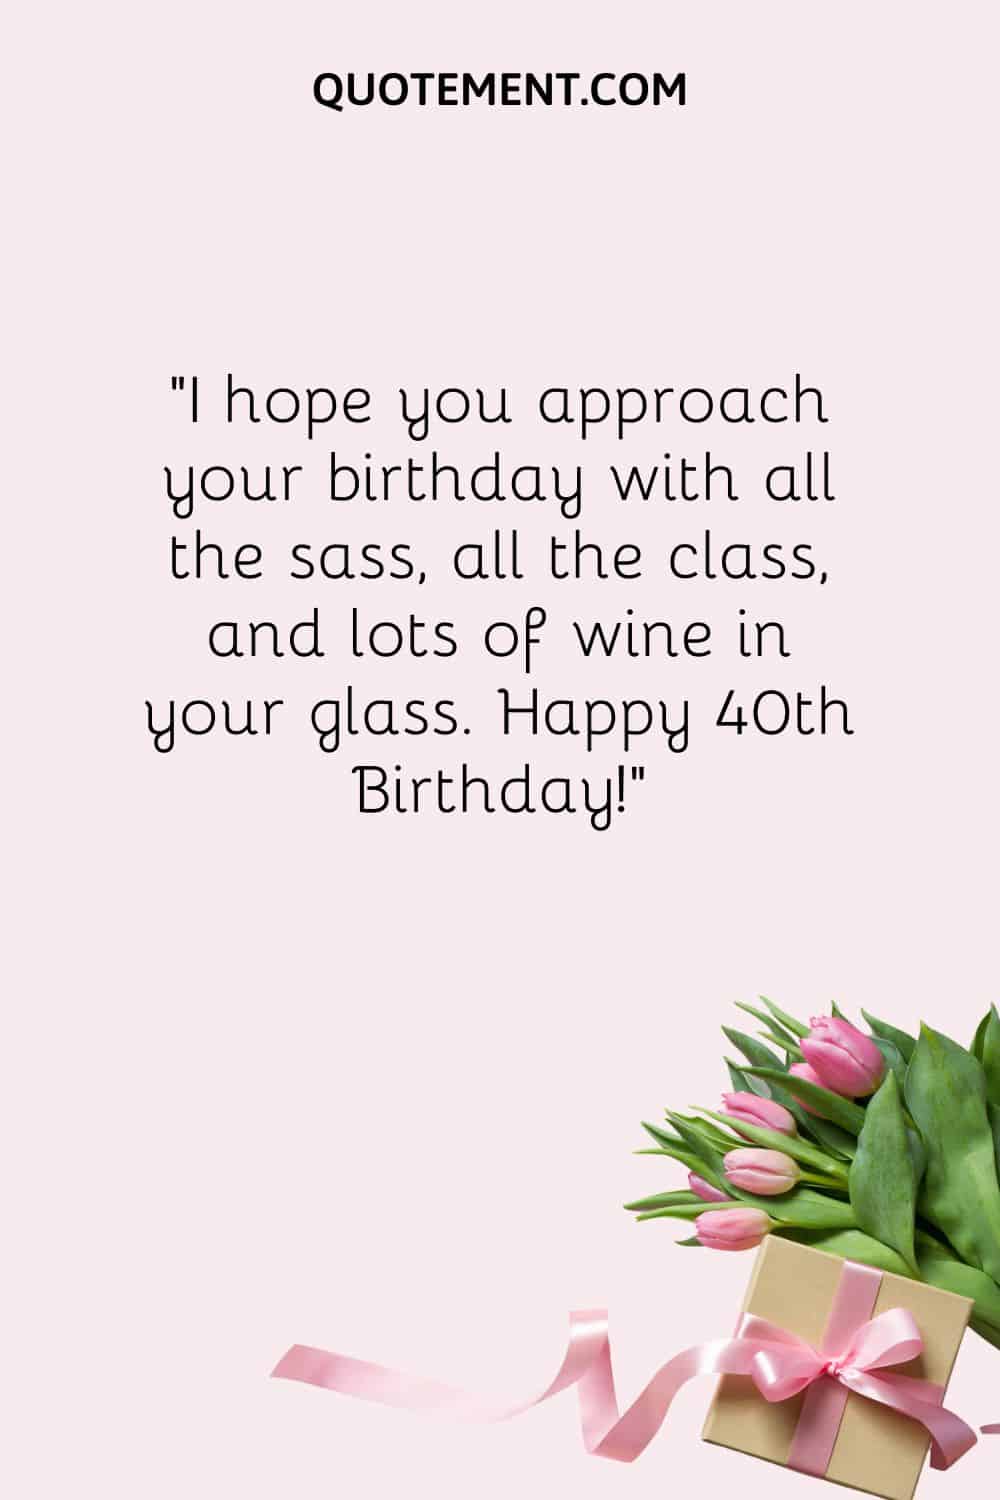 I hope you approach your birthday with all the sass, all the class, and lots of wine in your glass.